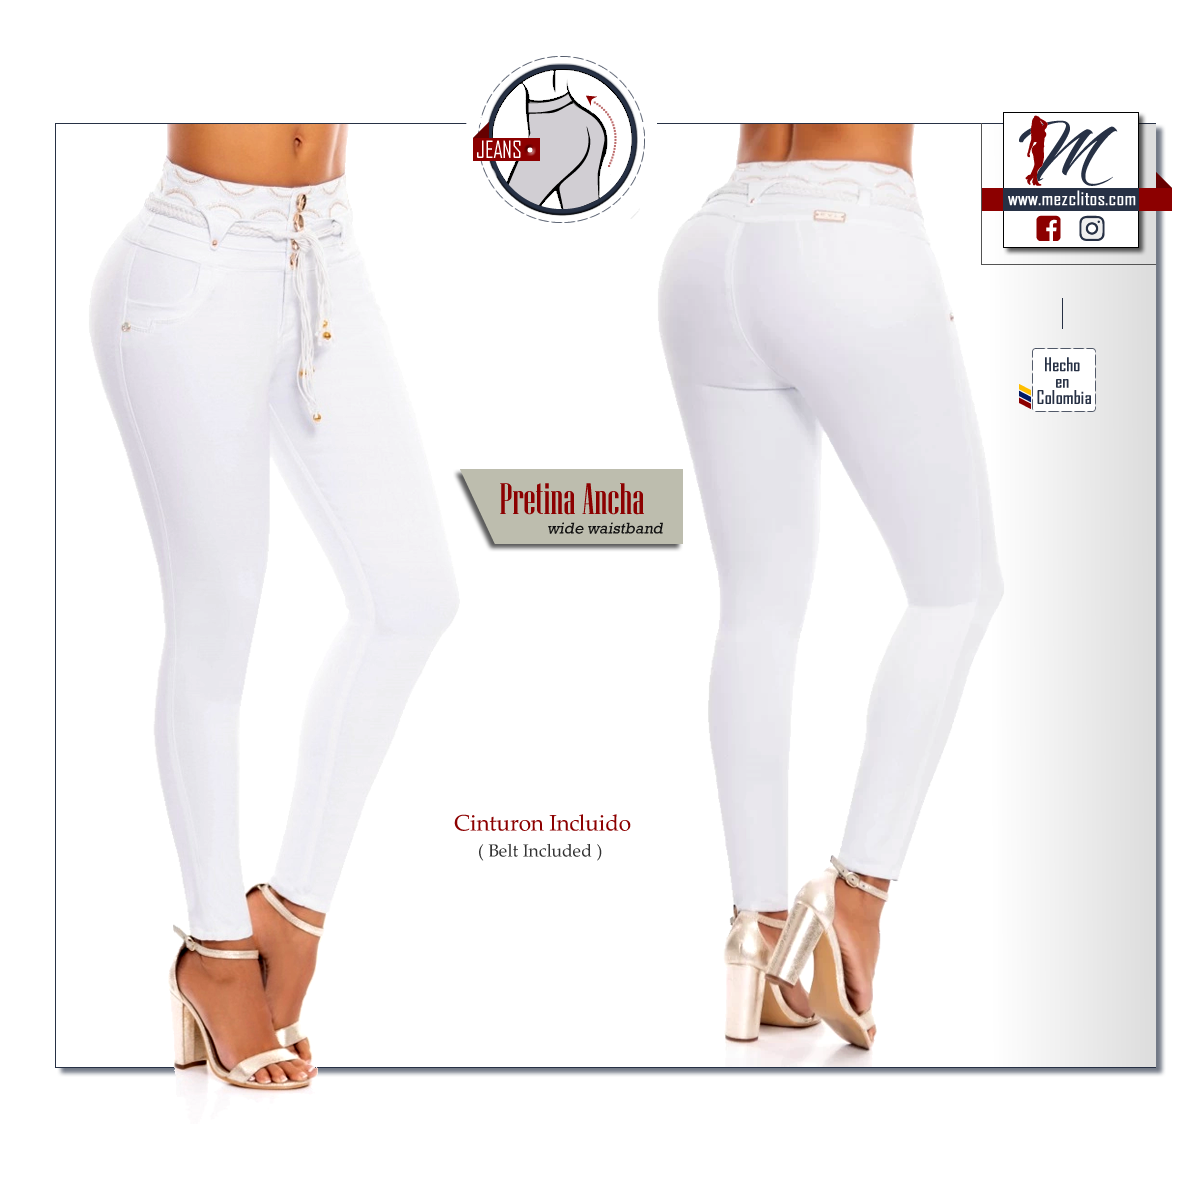 Revel Jeans 56765 - 100% Colombiano